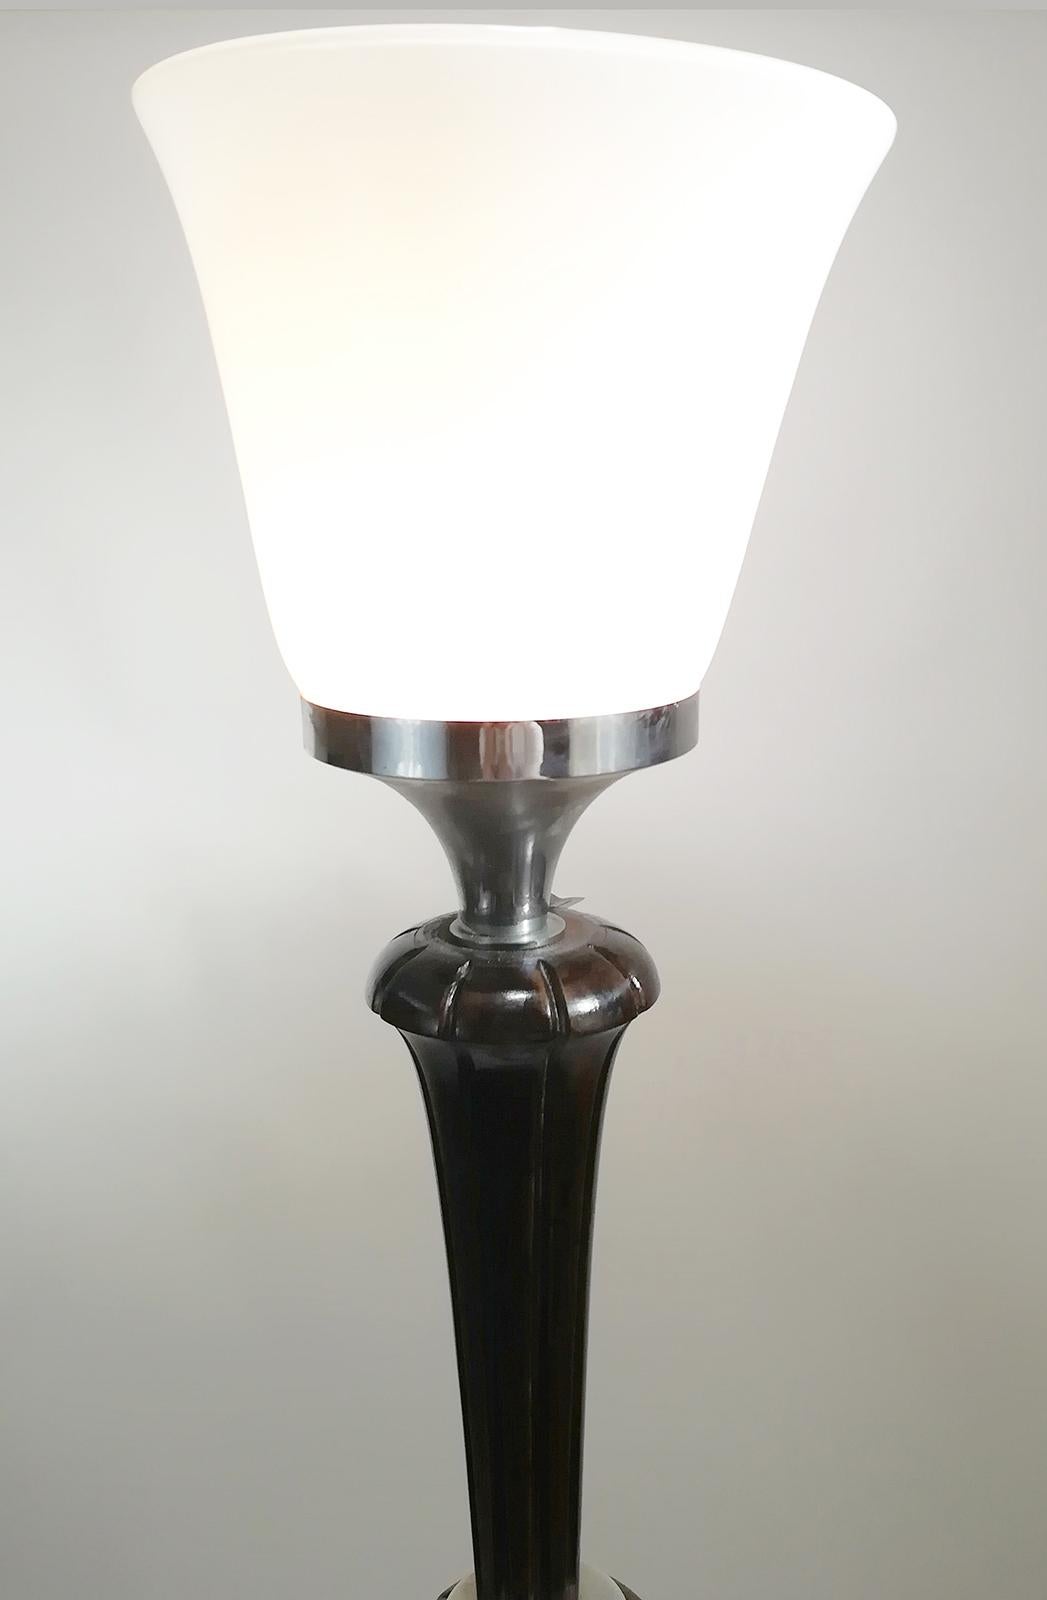 French origin Art Deco floor lamp. Consist of a dark brown wooden shaft, a circular base with opaline Mazda shade.
A dimmer is connected to the light fixture to lower the brightness of light.
It Accommodate one candelabra bulb: 150 Watts
Can be